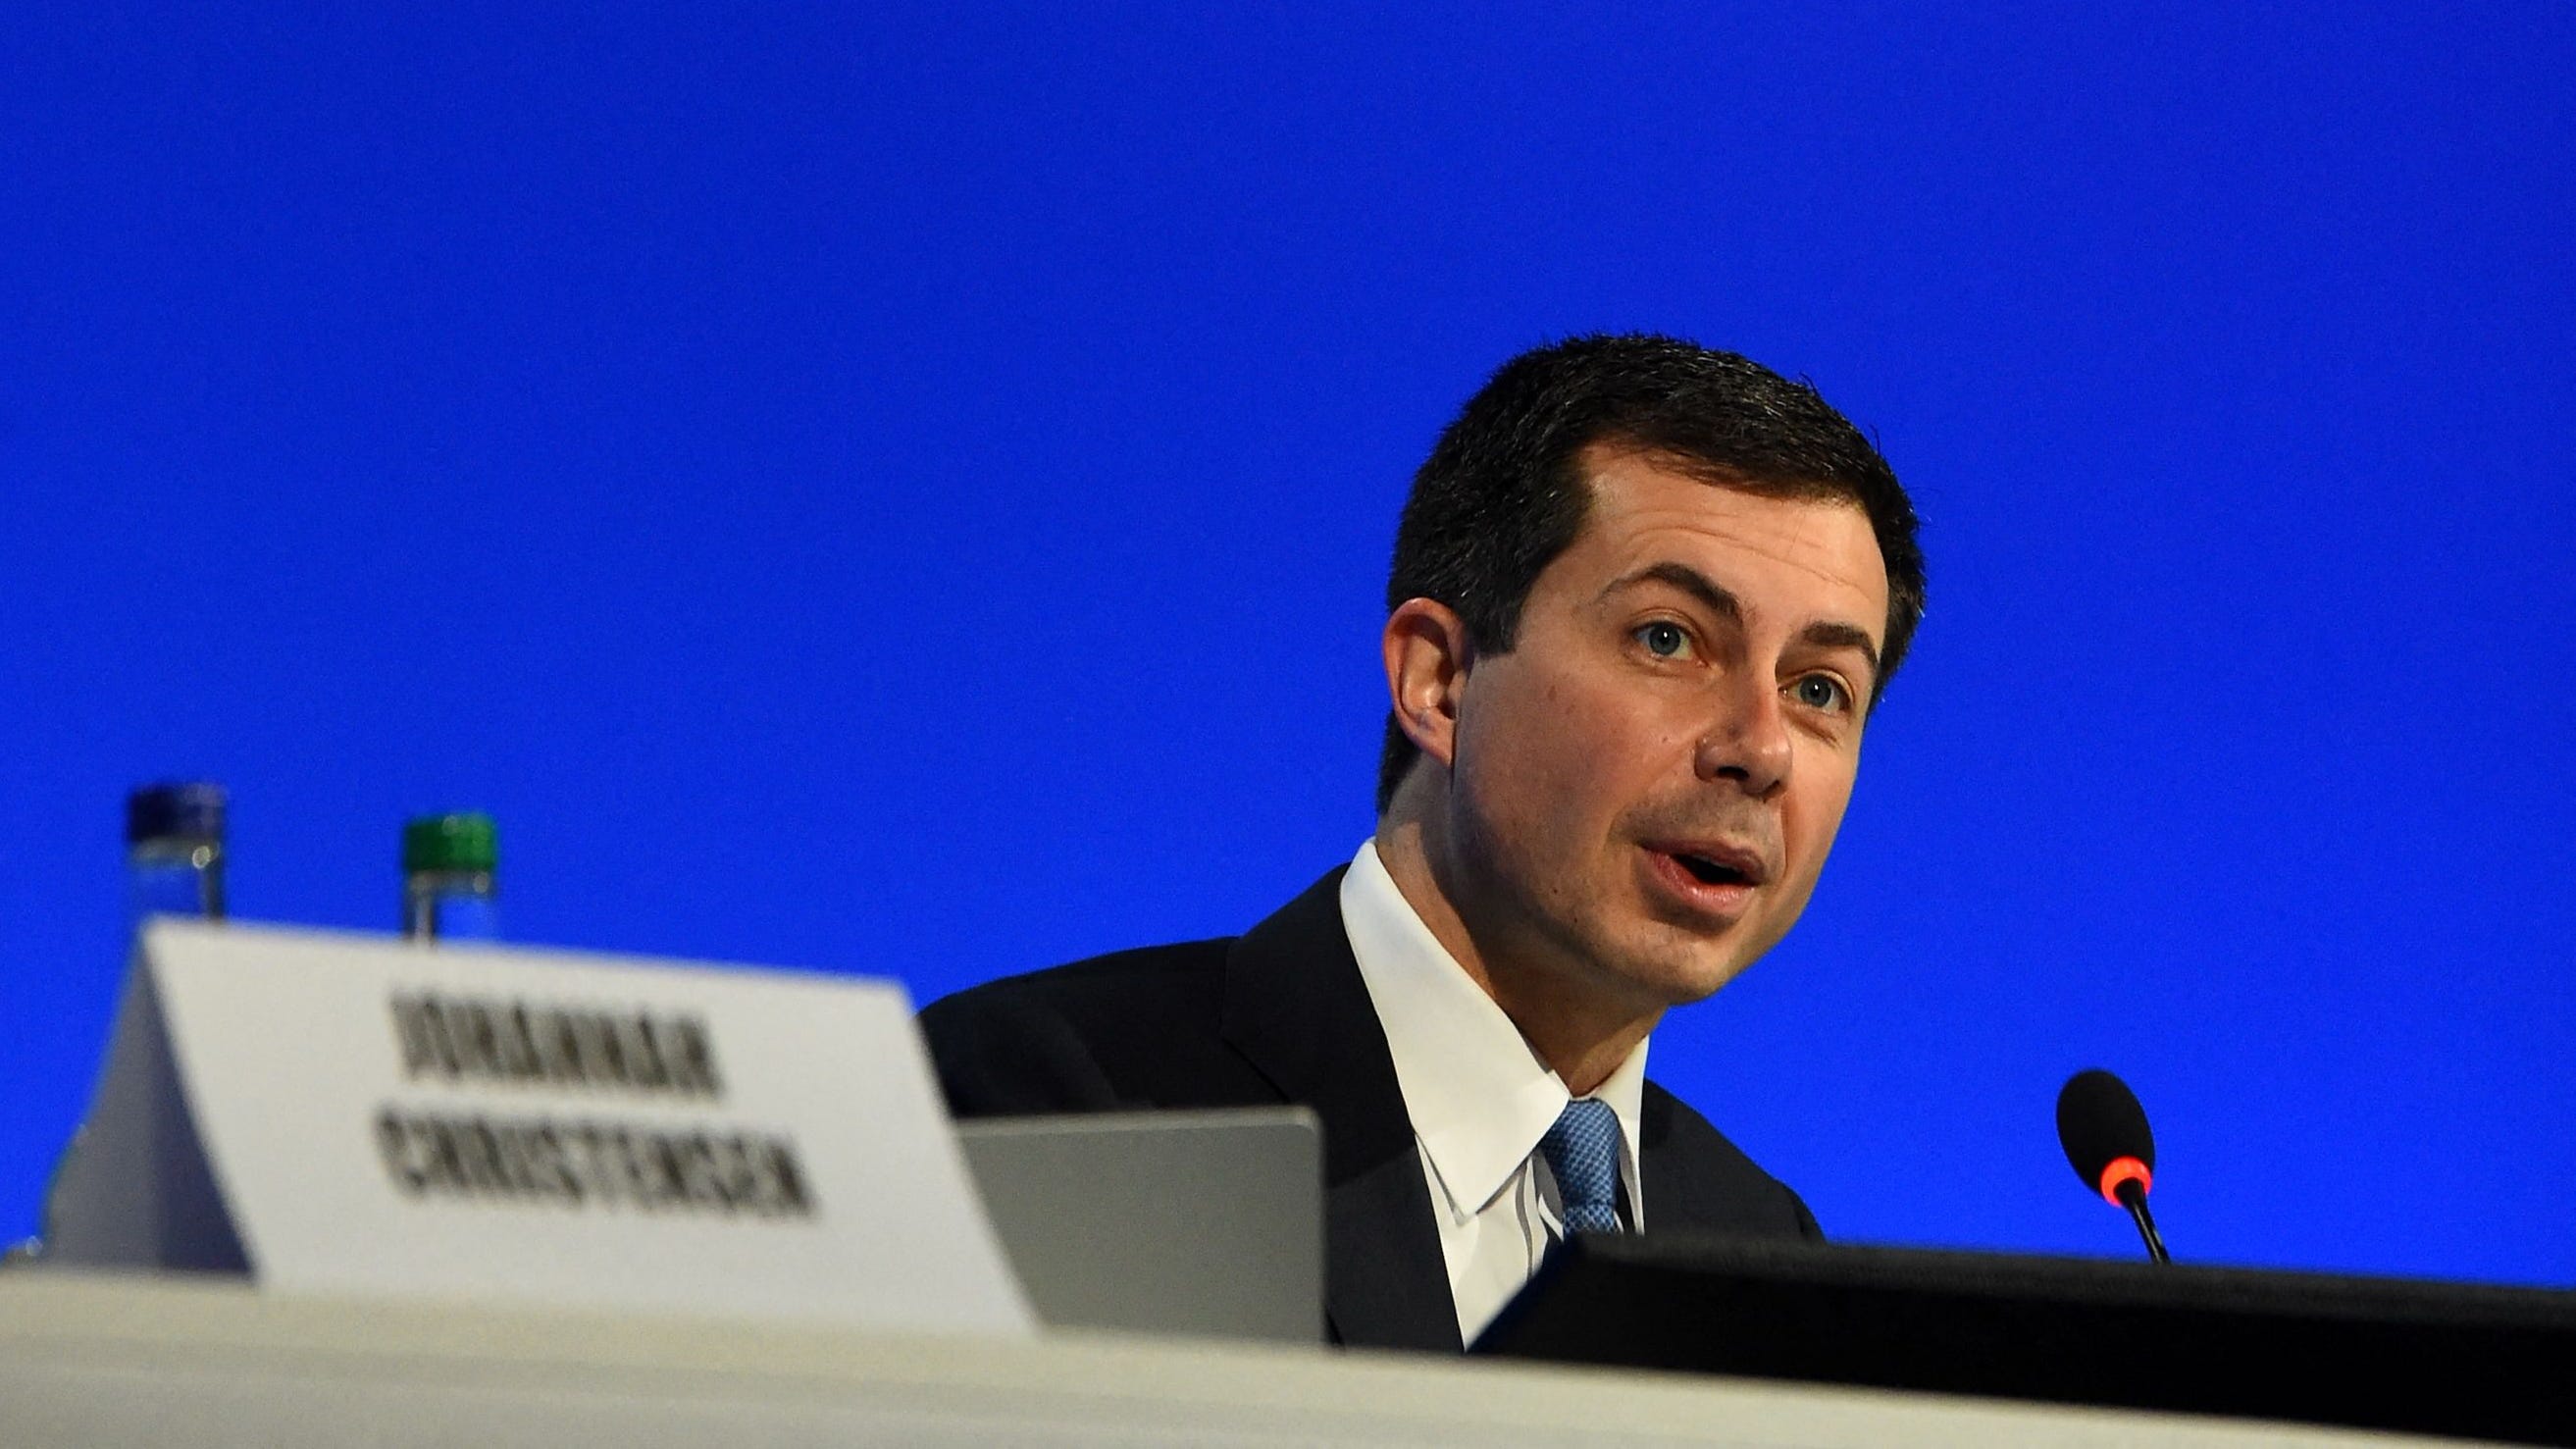 US Transportation Secretary Pete Buttigieg speaks at a session during the COP26 UN Climate Change Conference in Glasgow on November 10, 2021.